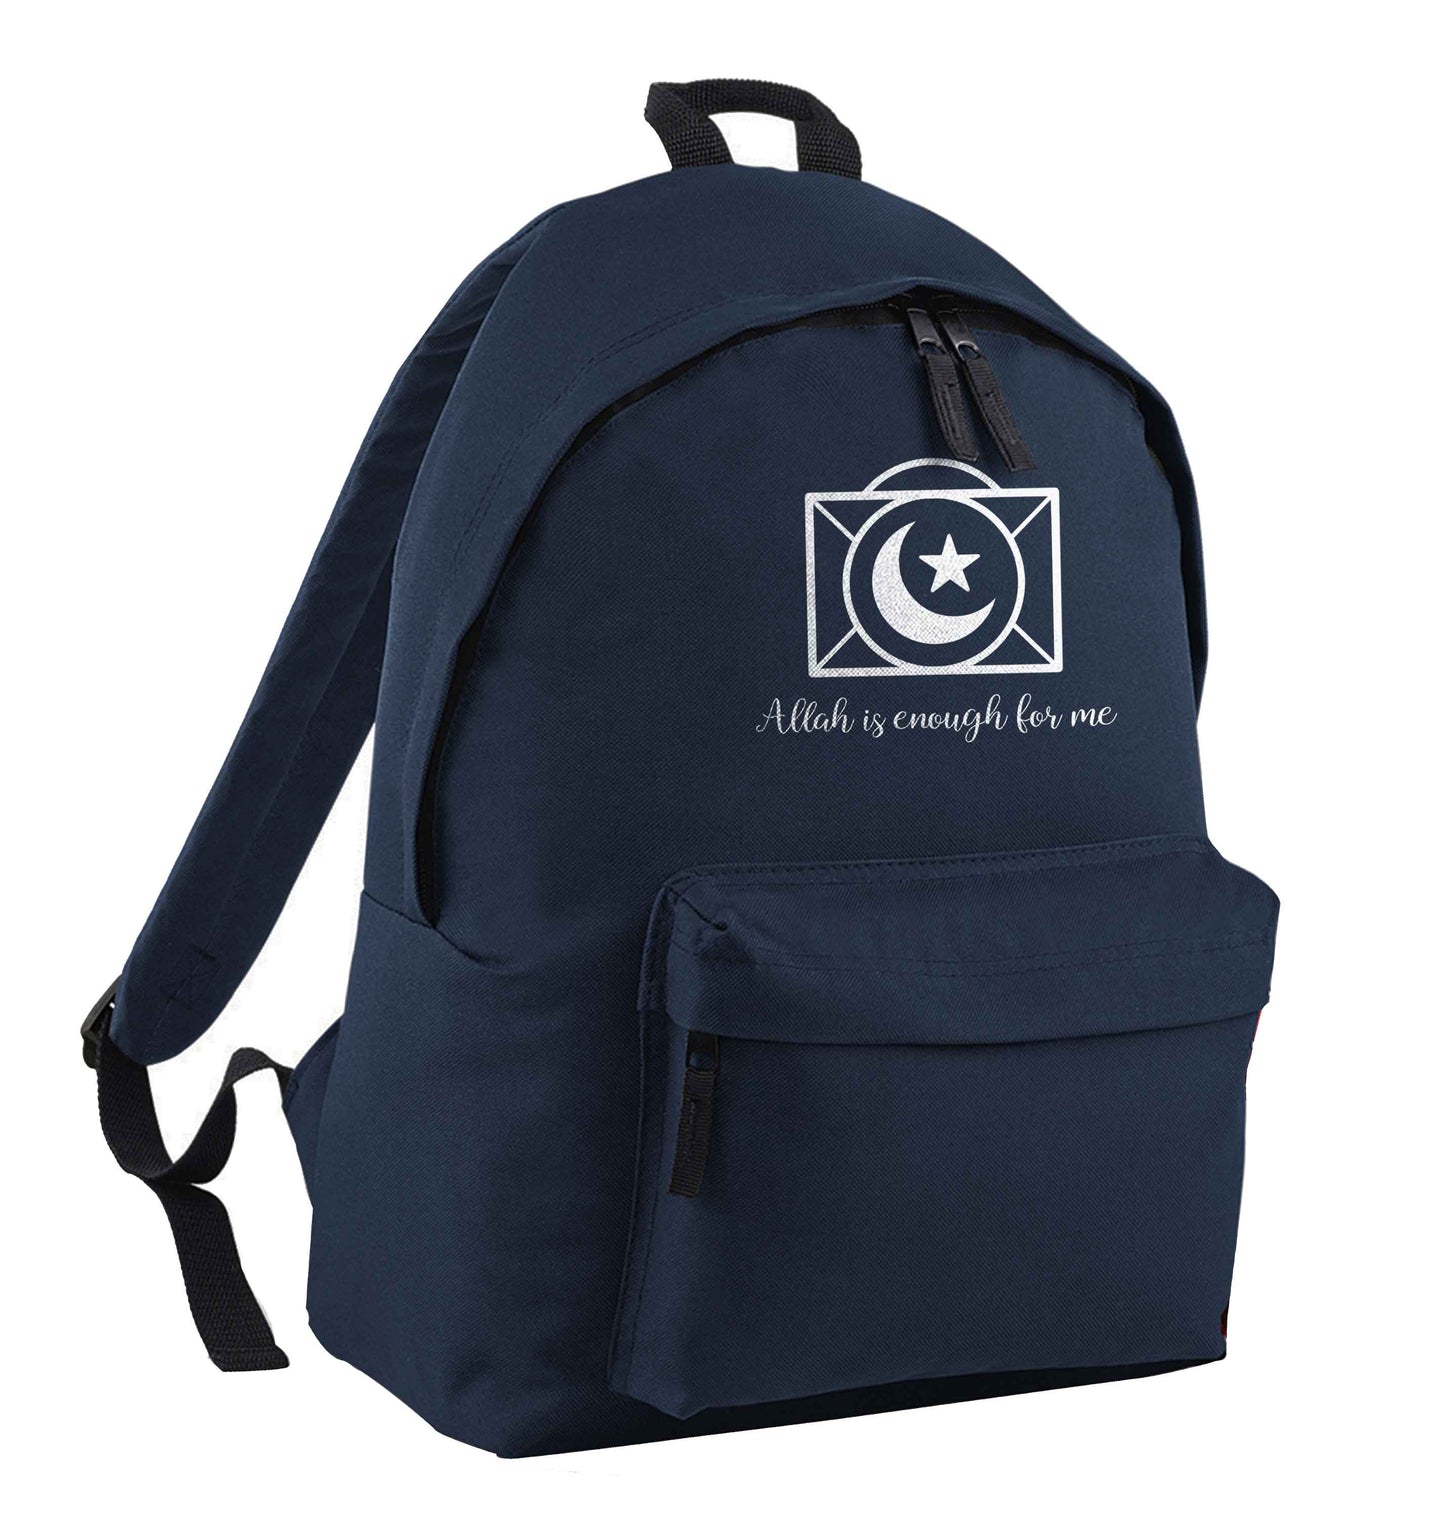 Allah is enough for me navy adults backpack